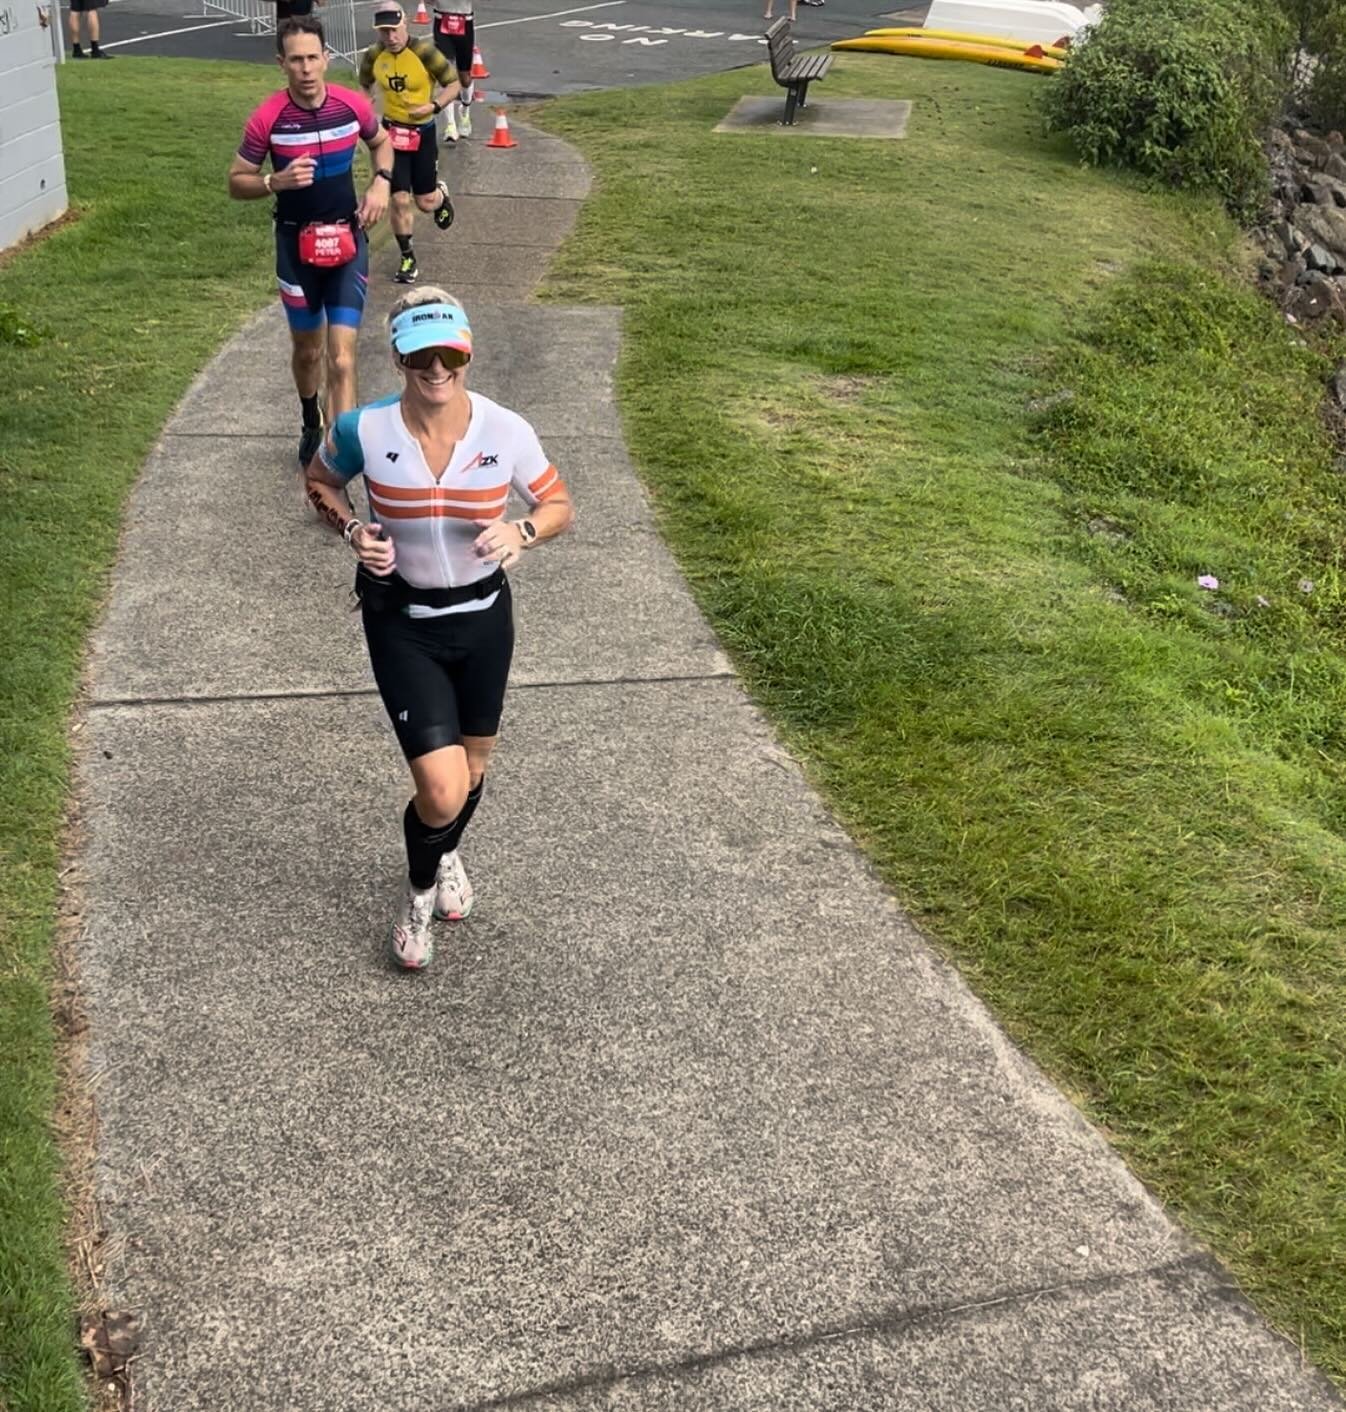 Always one of the most hard workers in the room, always giving her best no matter what . Always gets her mind in the game when it counts . 
Tremendous work over port Mac 70.3 @kimboyd69 coming away with 5th in her age group as we build through the ye